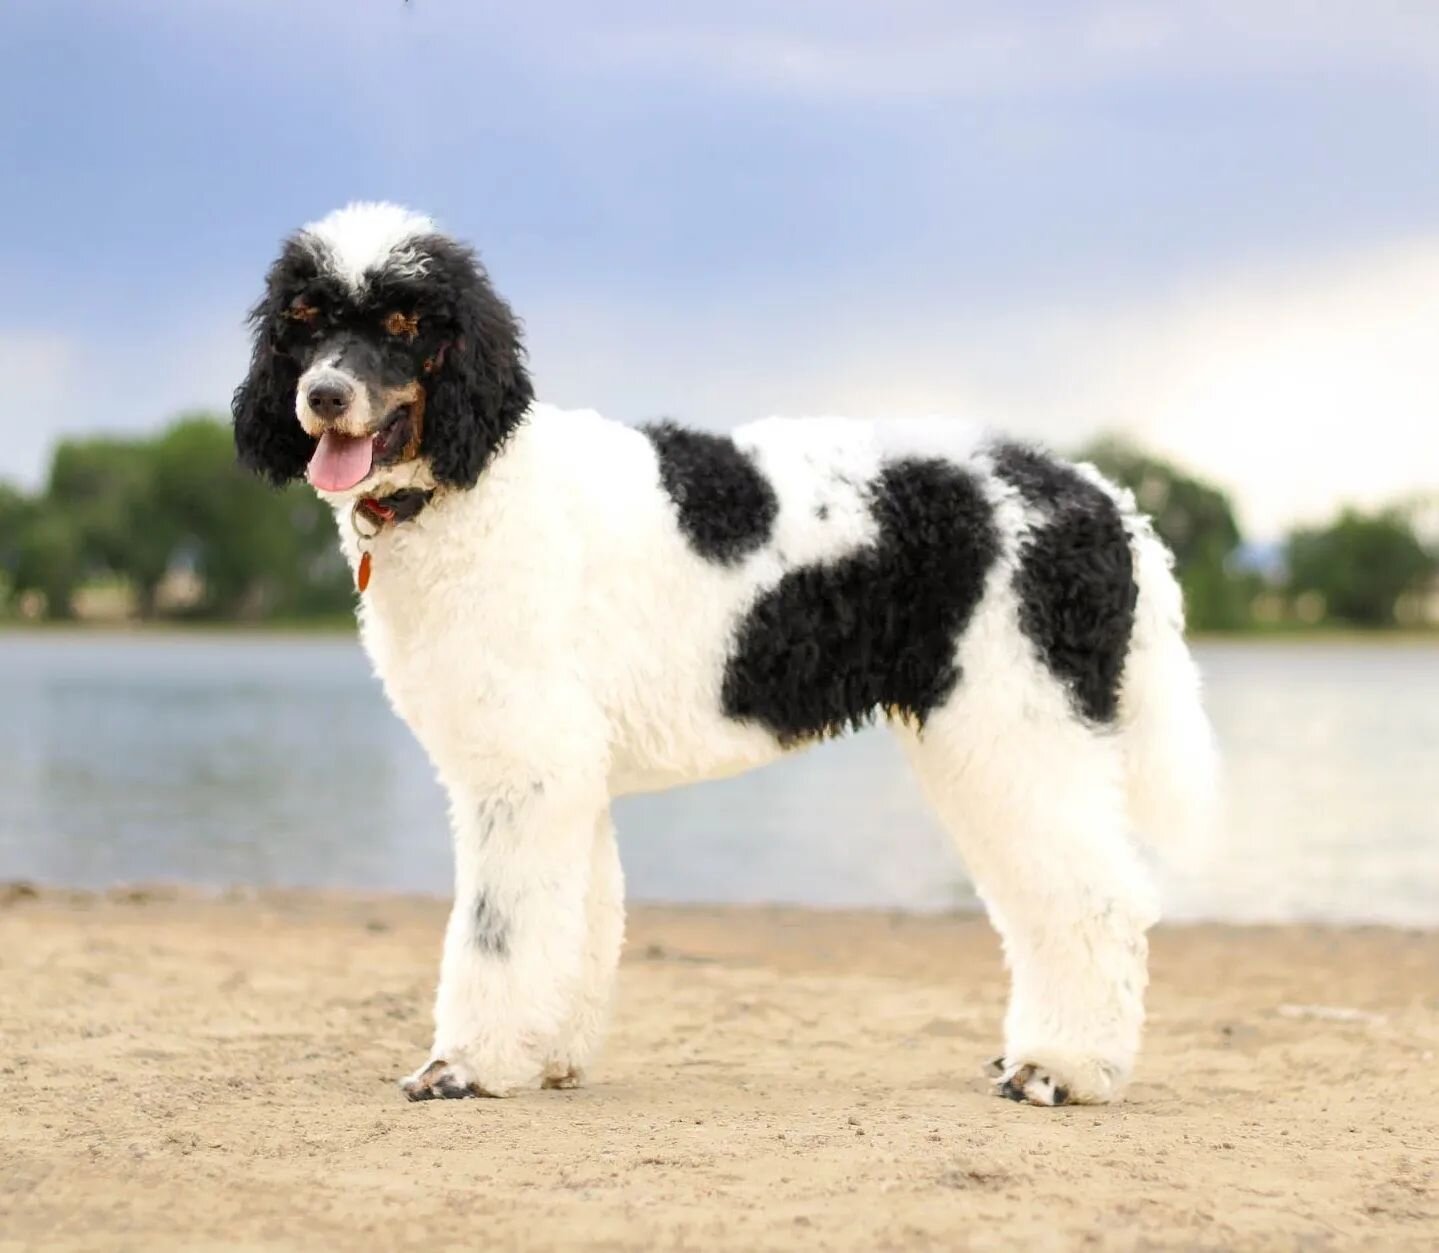 Boden officially passed his PennHip exam 🏆 We couldn't be more excited to have him in our program. Between his loud tri-coloring and sweet disposition, we're sure his puppies will be wonderful!

#haystackmountain #haystackbernedoodles  #bernedoodle 